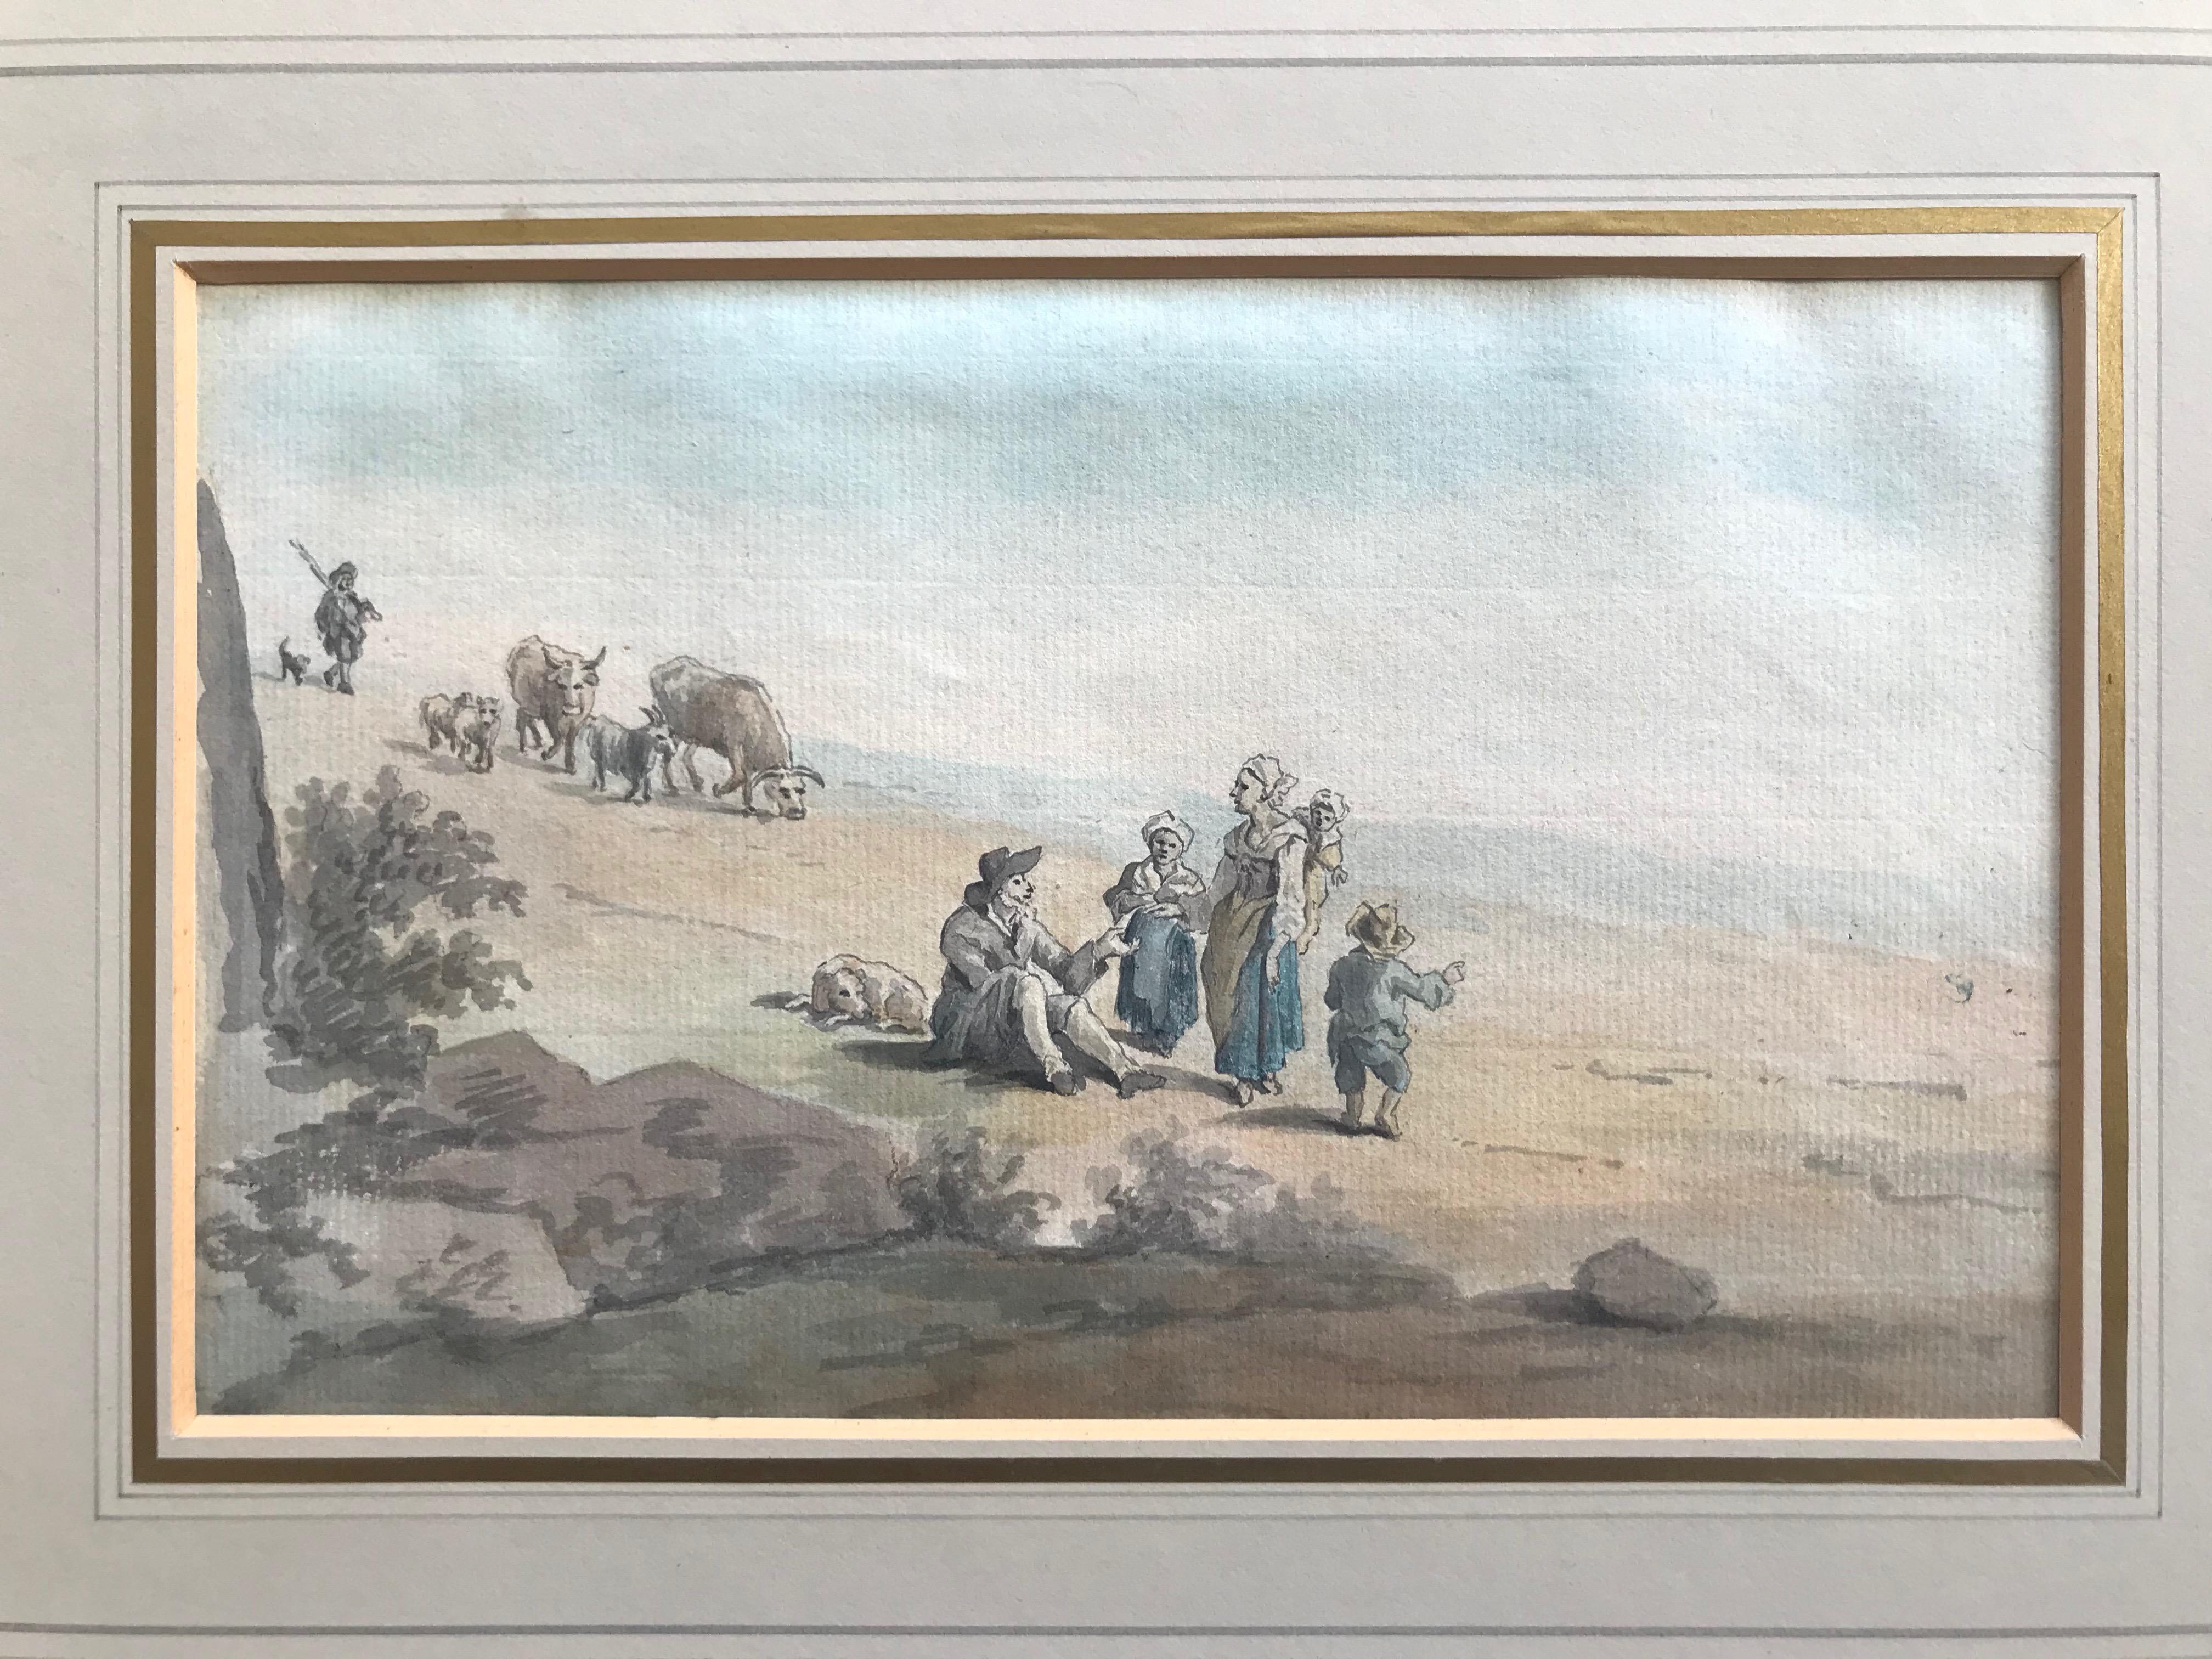 Attributed to Peter Le Cave, 18th Century watercolor on laid paper, rustic scene